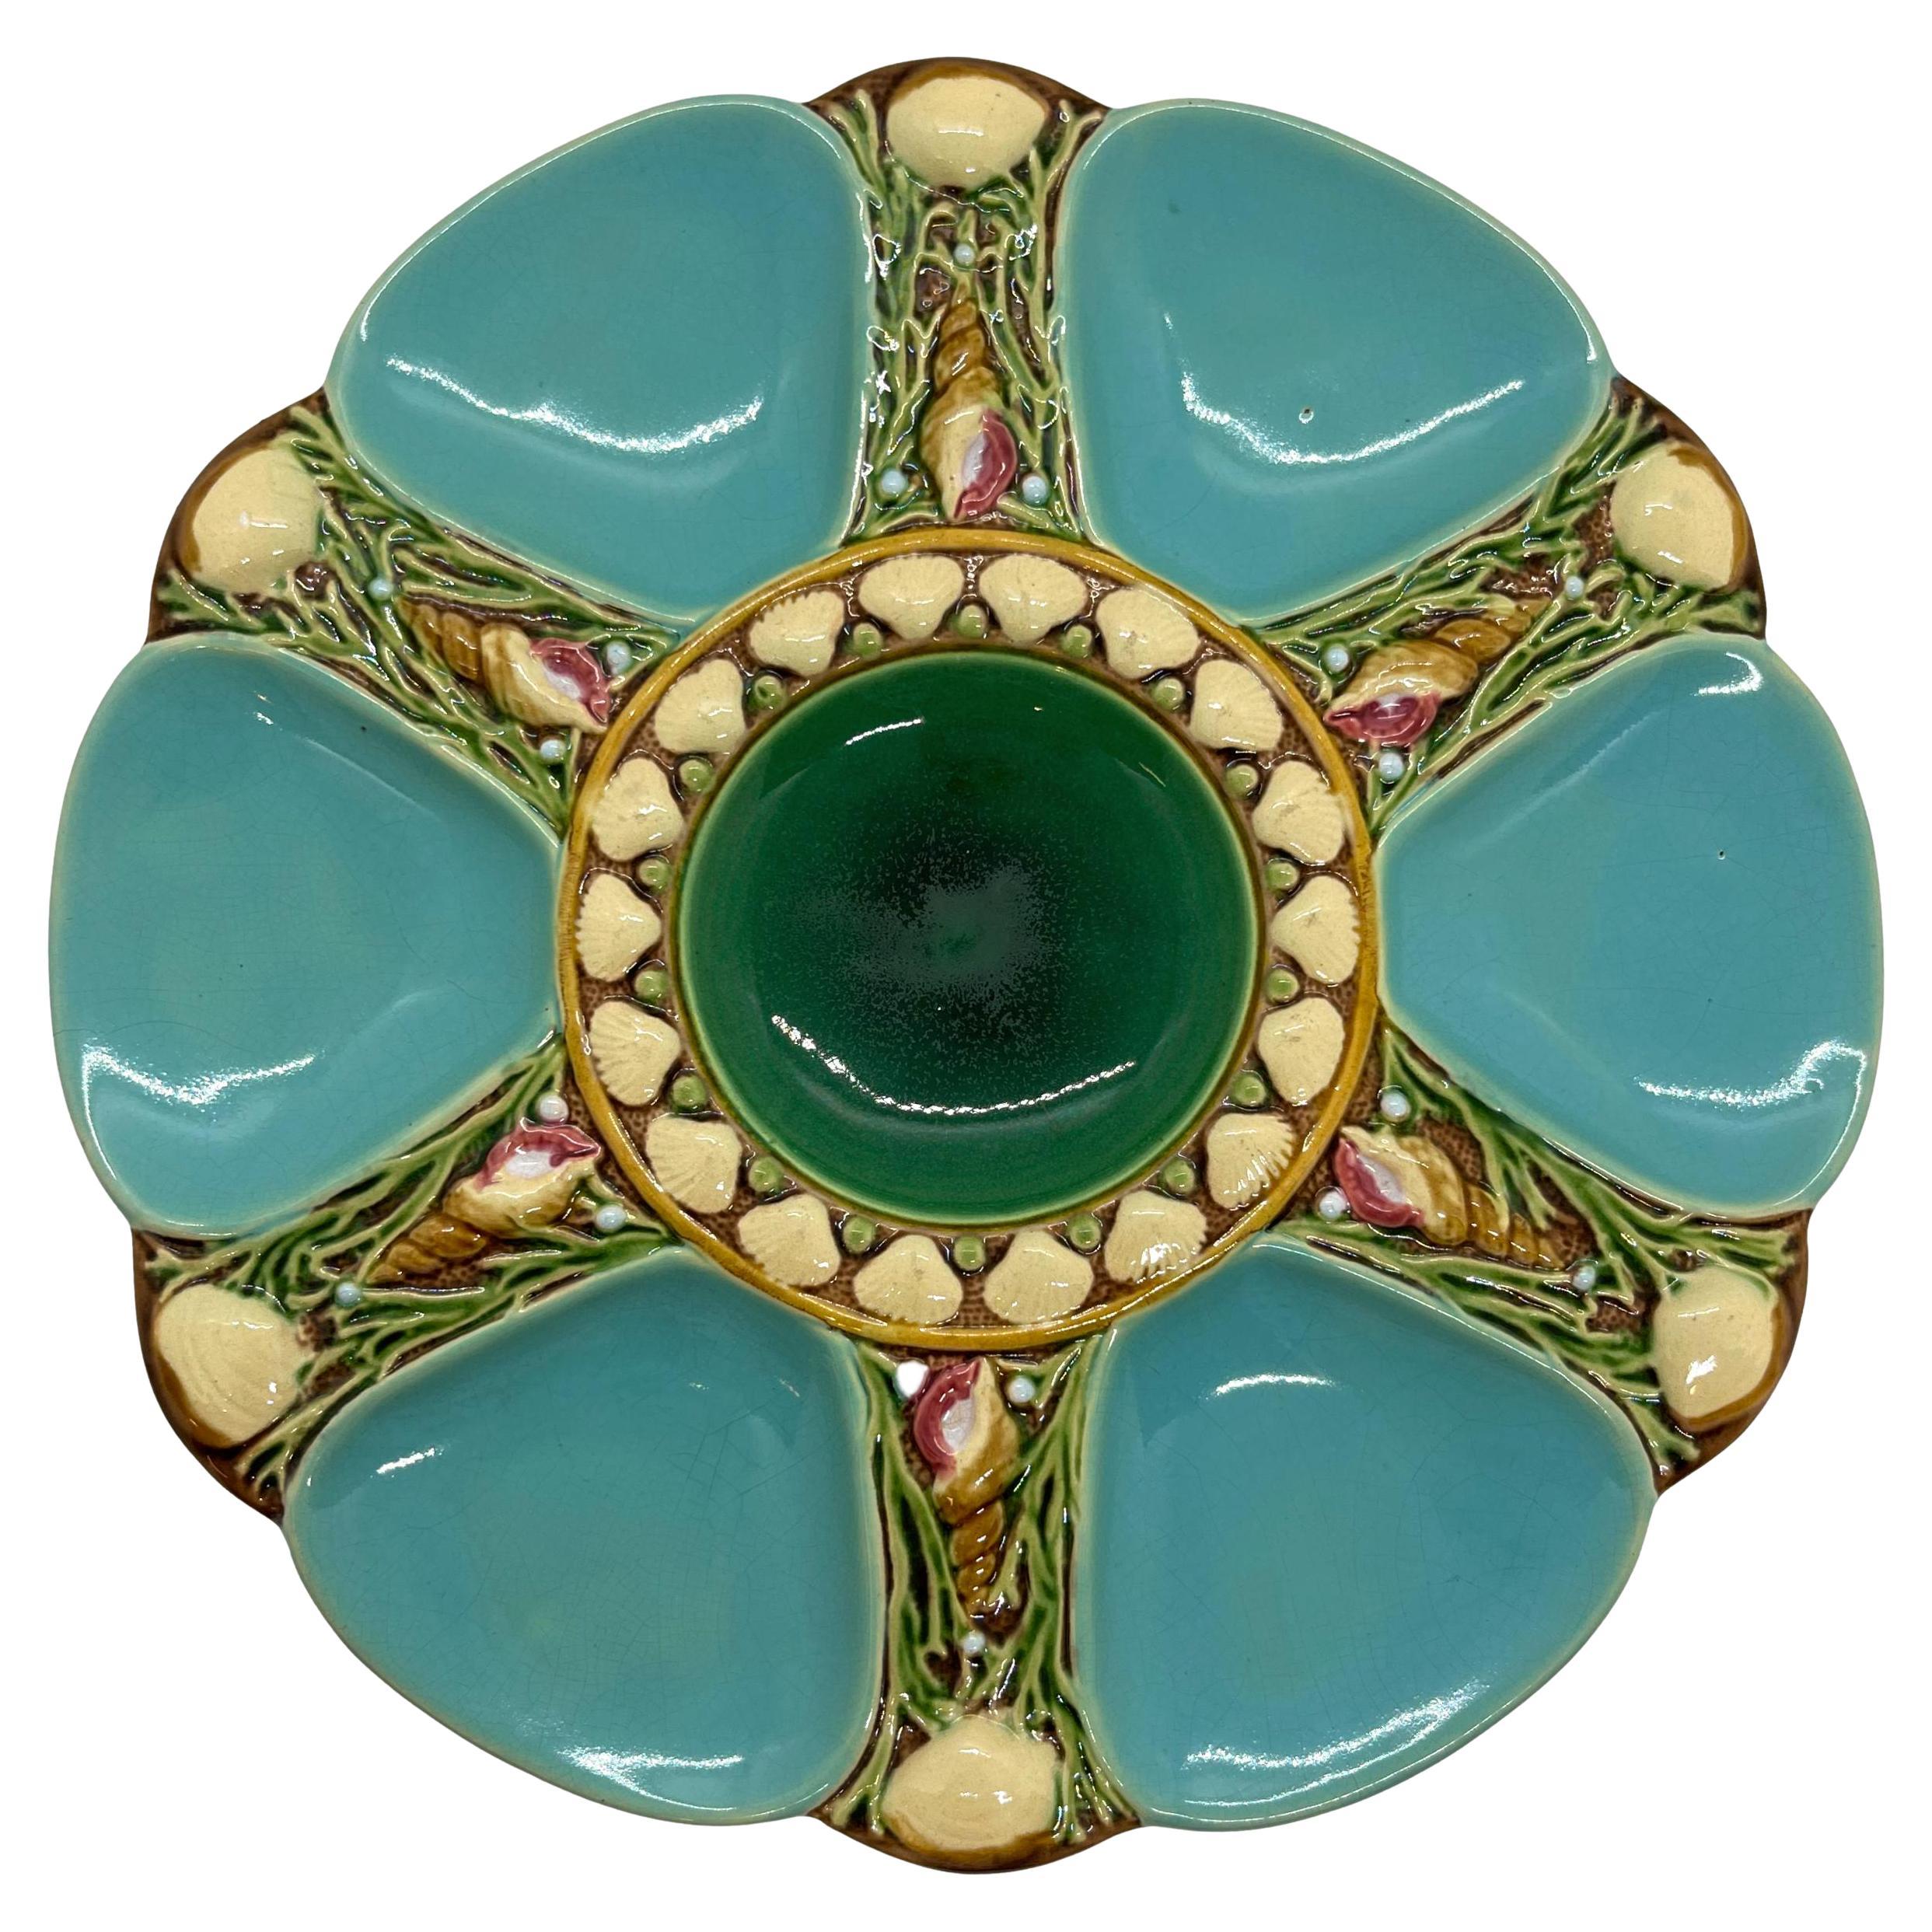 Minton Majolica Turquoise Six Well Oyster Plate, English, Dated 1895